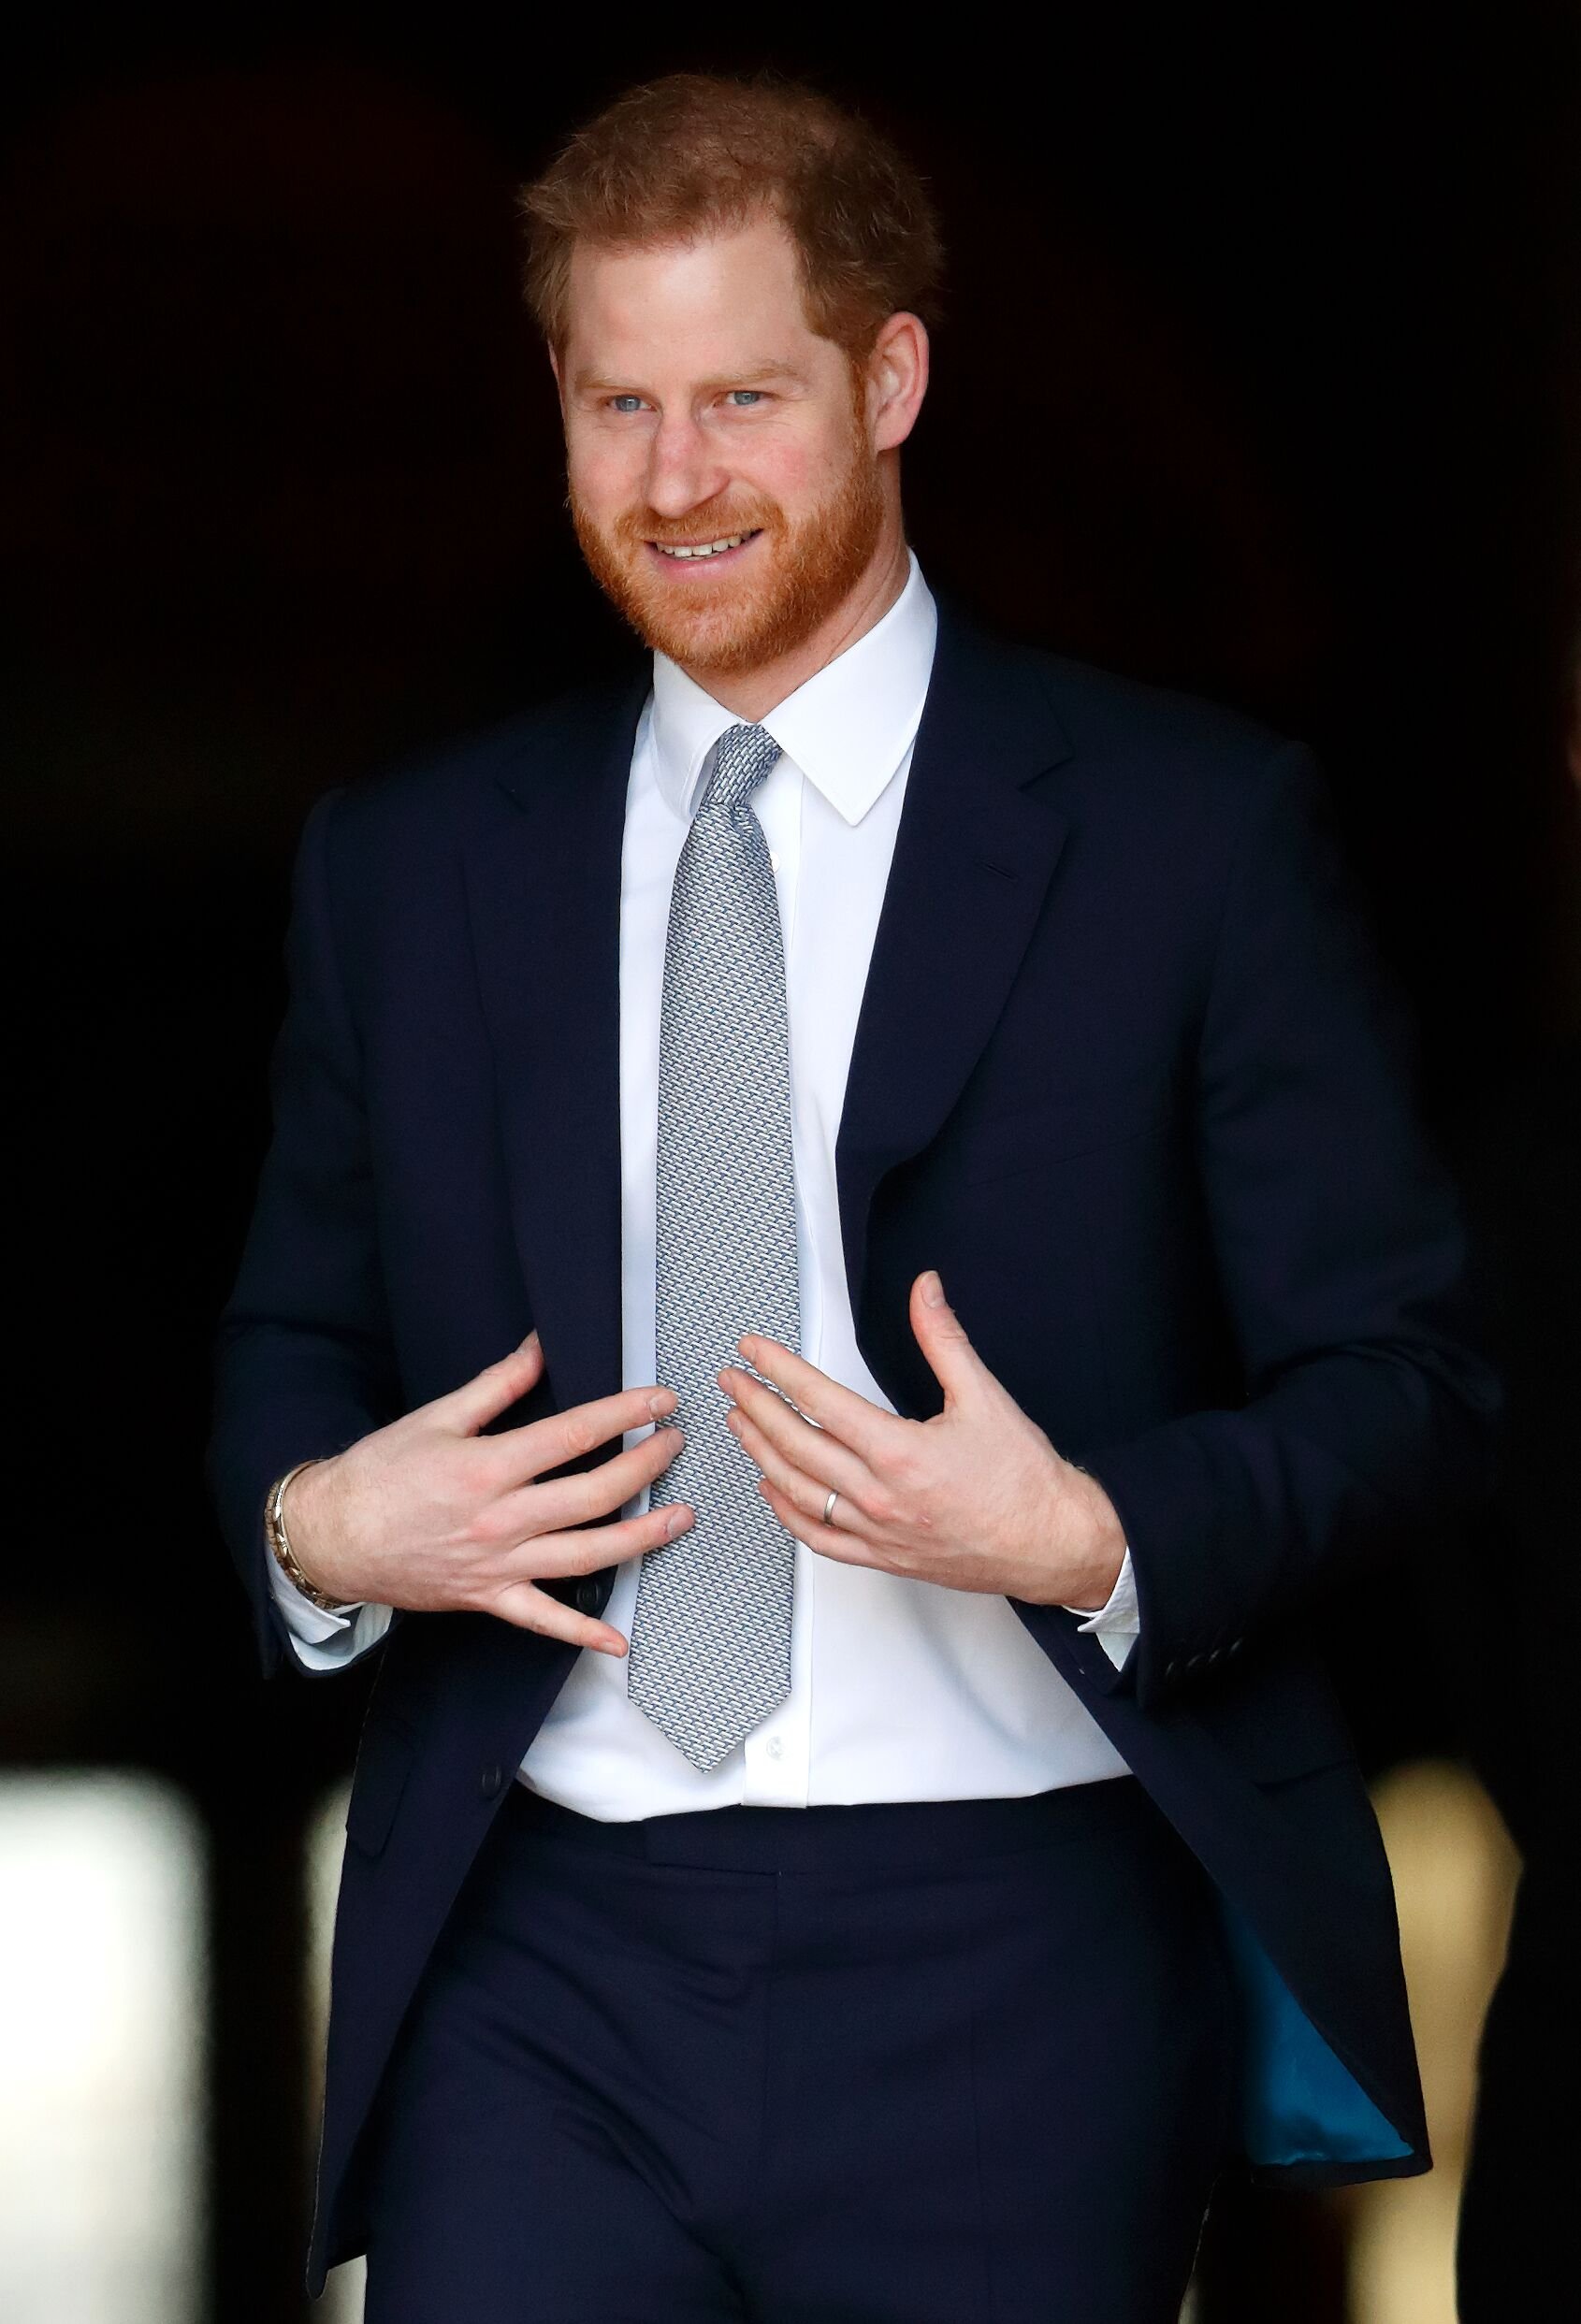 Prince Harry hosts the Rugby League World Cup 2021 draws for the men's, women's and wheelchair tournaments at Buckingham Palace on January 16, 2020 | Photo: Getty Images